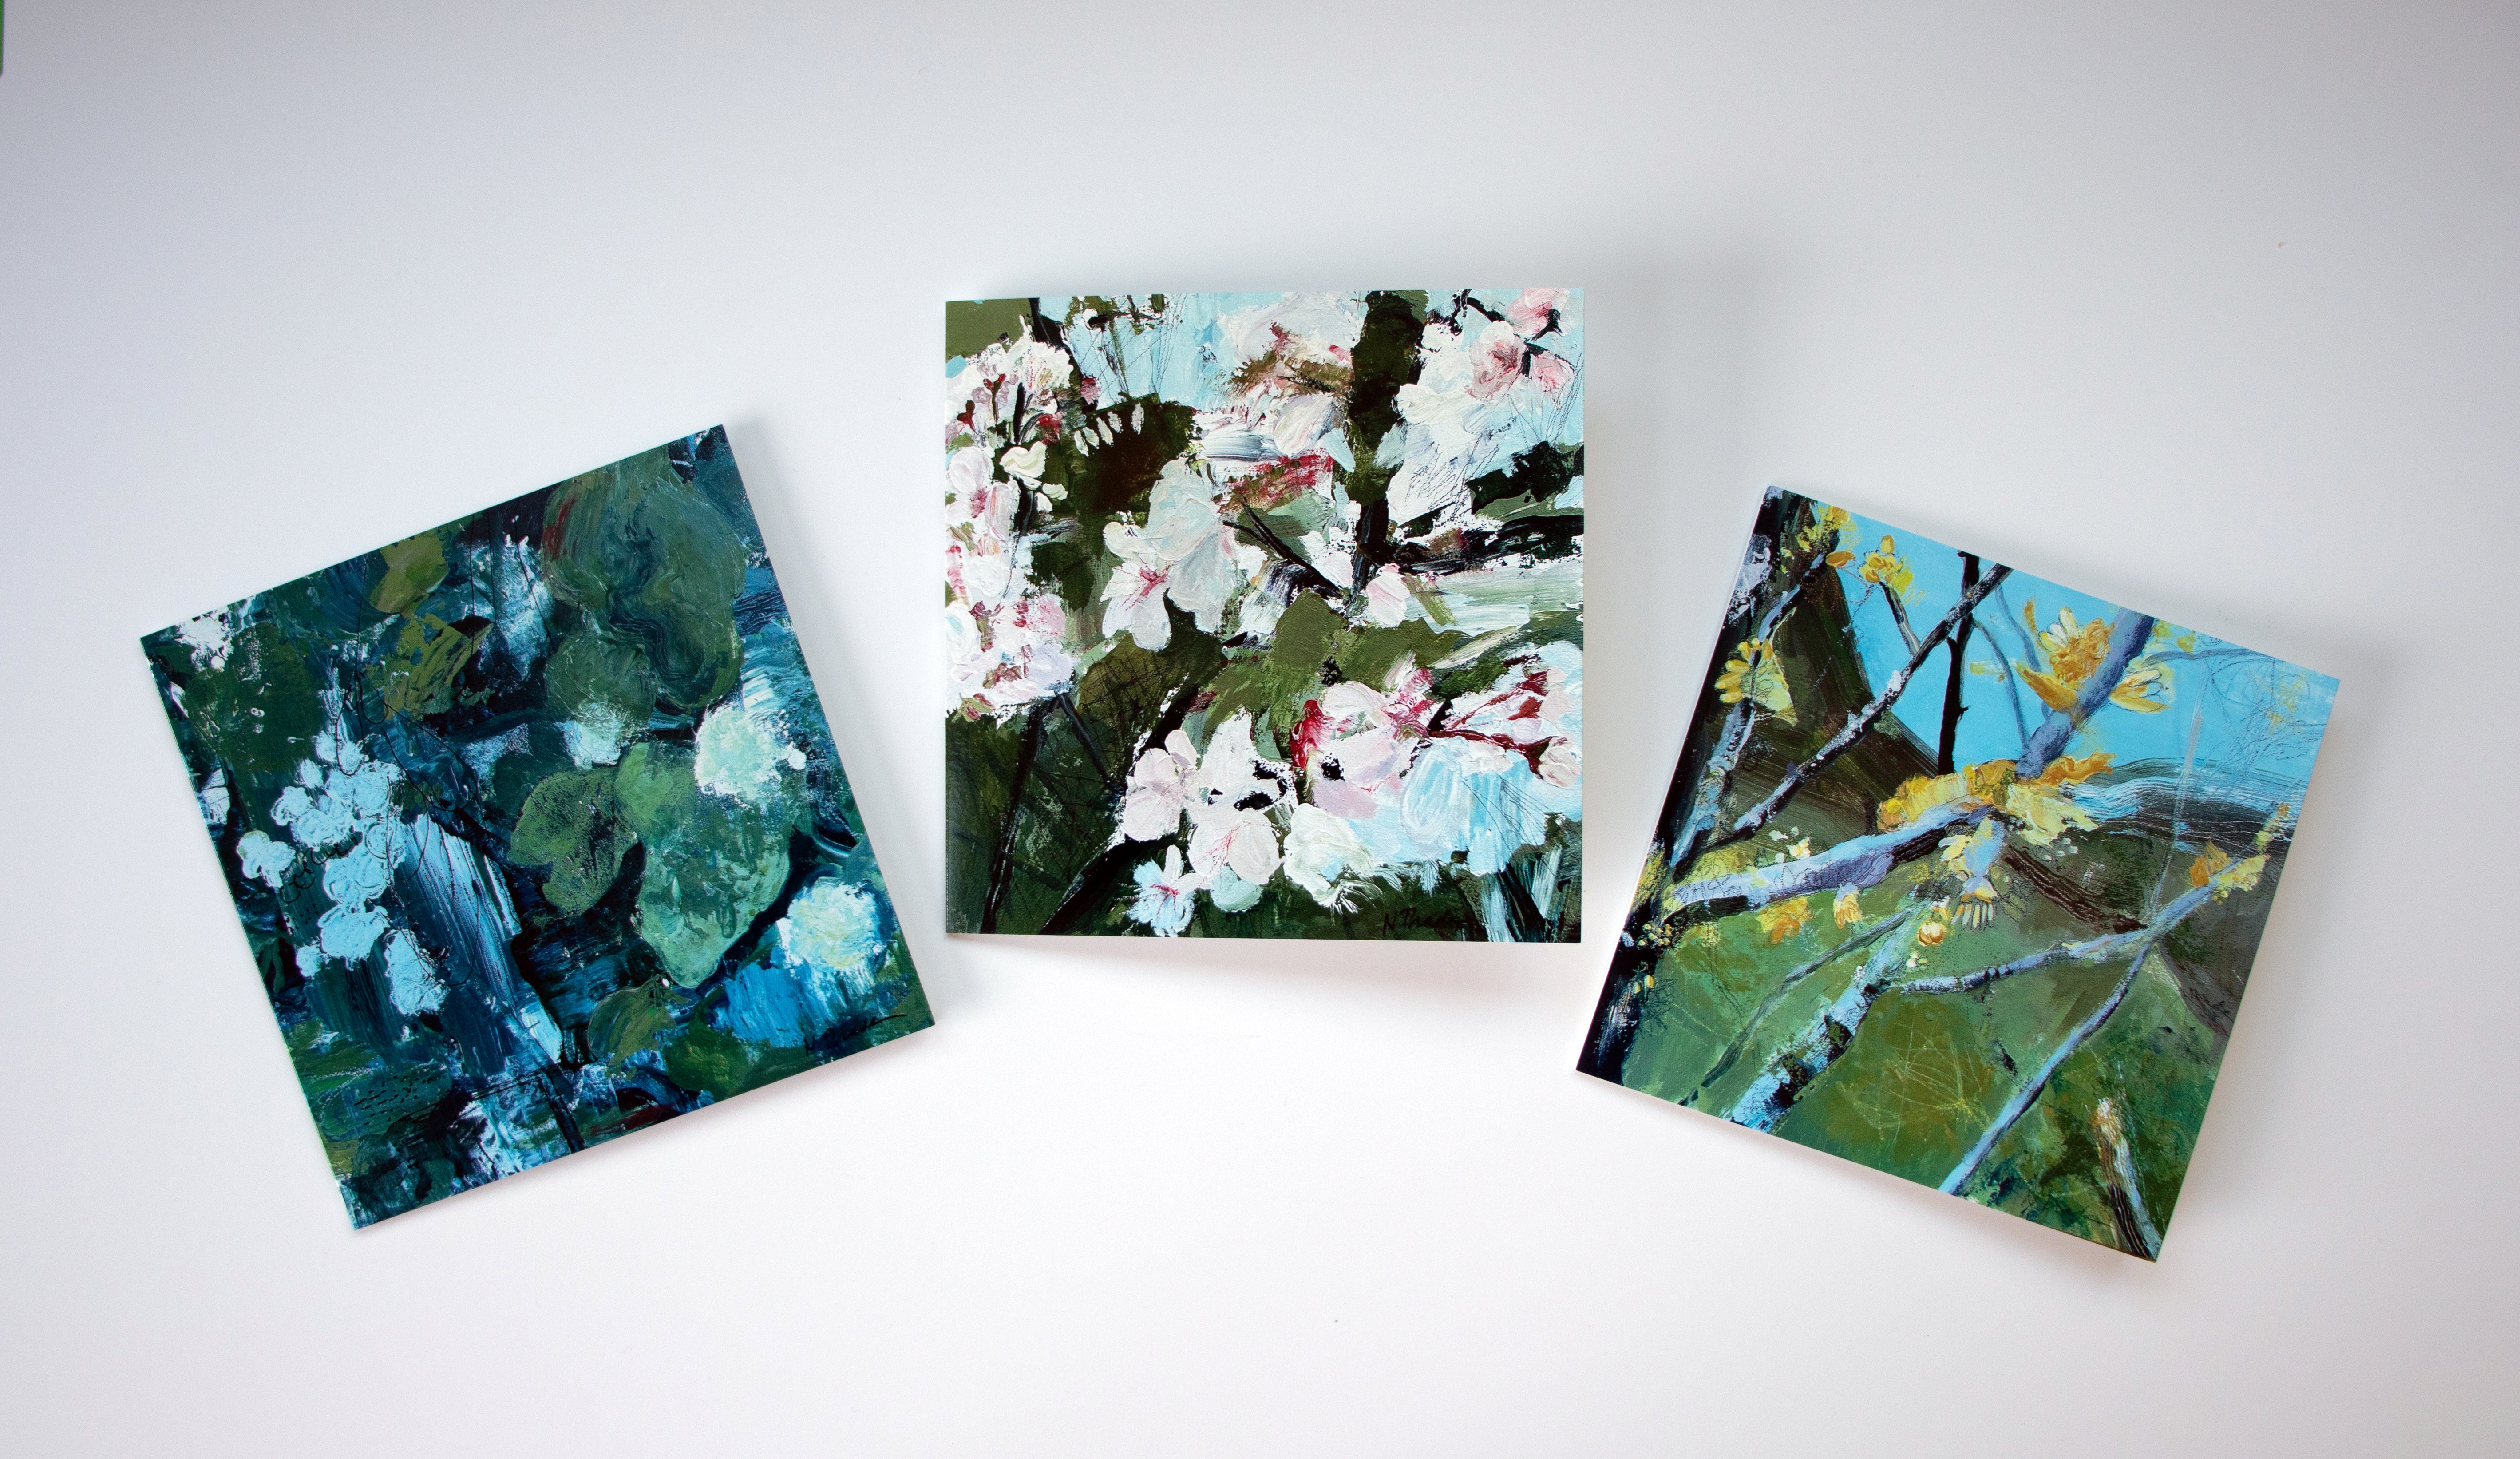 Spring Series Note Cards, set of 9